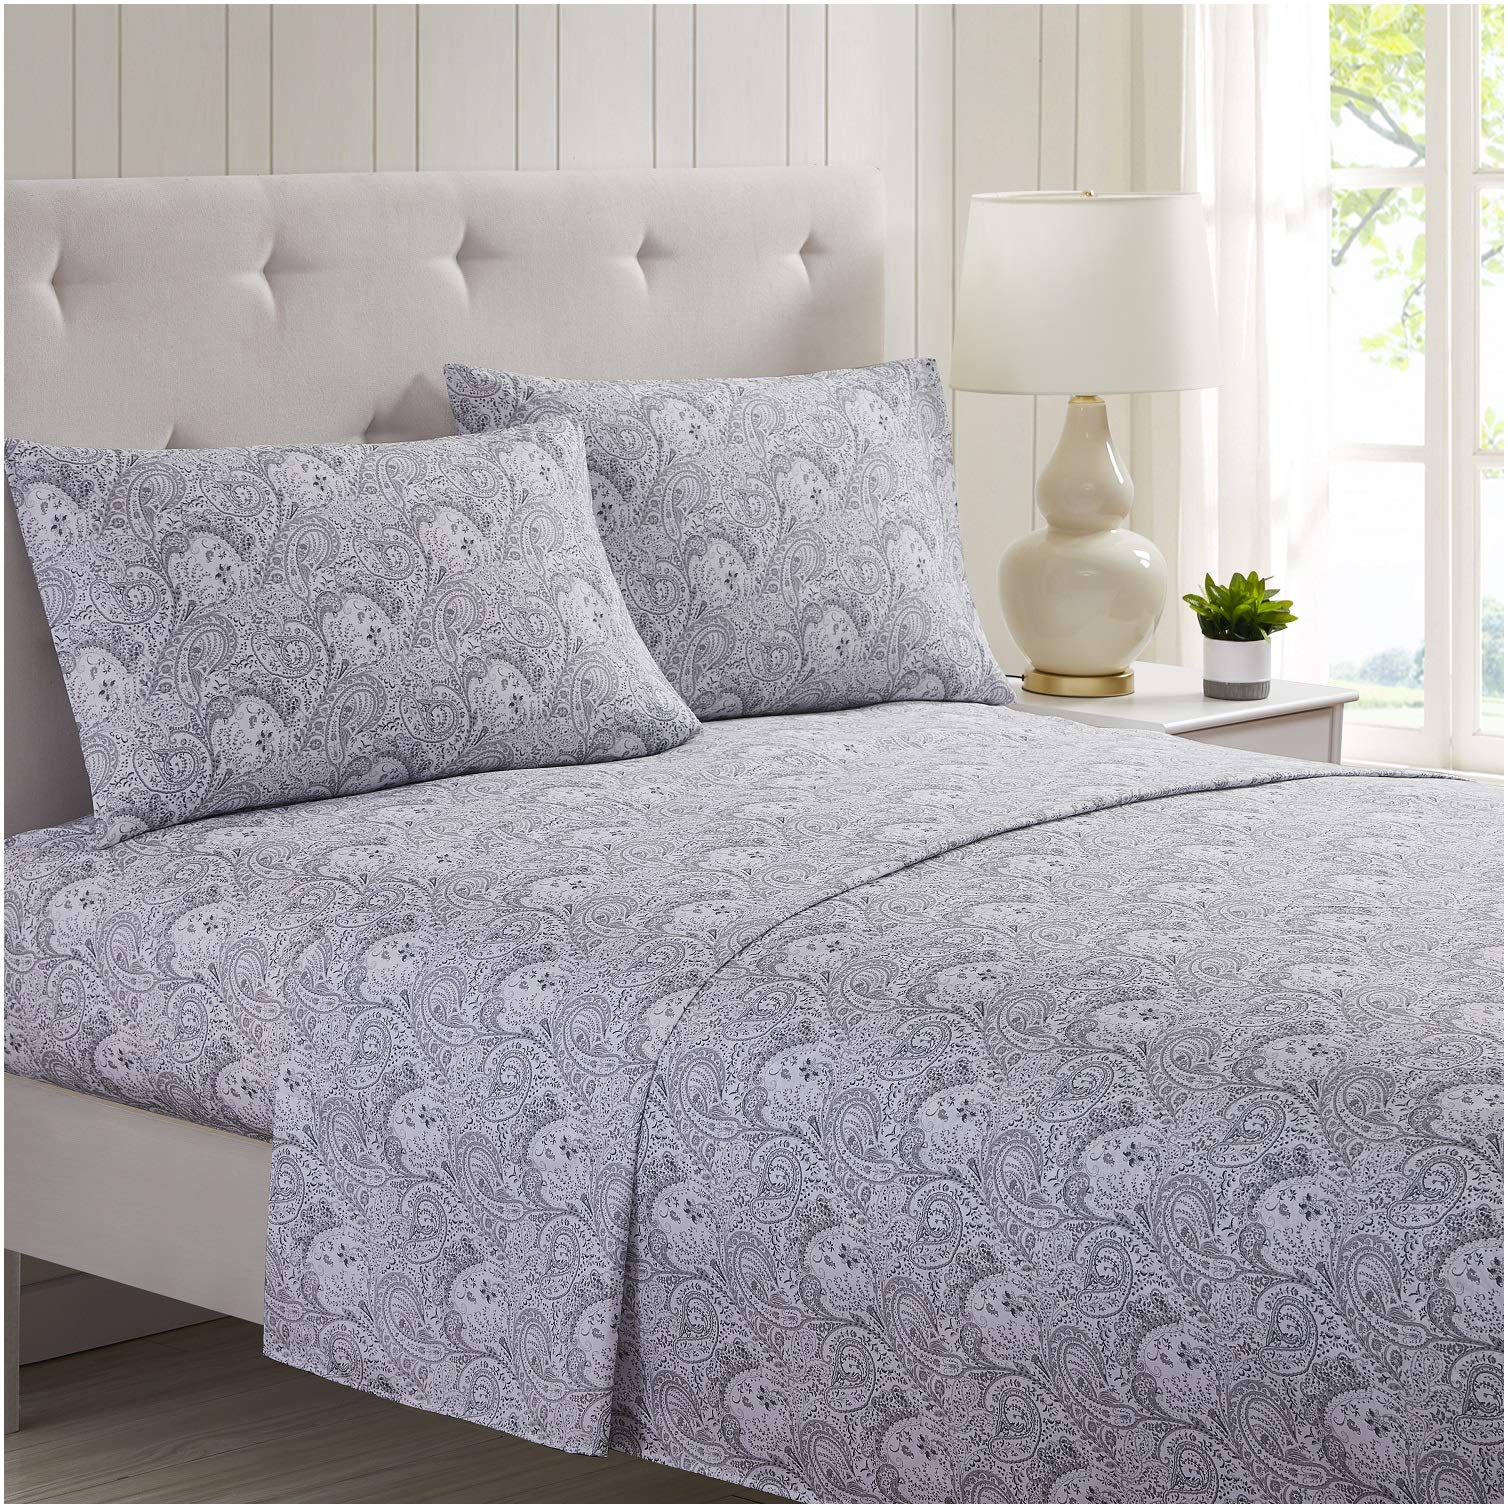 Book Cover Mellanni Full Size Sheet Set - 4 Piece Iconic Collection Bedding Sheets & Pillowcases - Extra Soft, Cooling Bed Sheets - Deep Pocket up to 16 inch - Wrinkle, Fade, Stain Resistant (Full, Paisley Gray) Full Paisley Gray